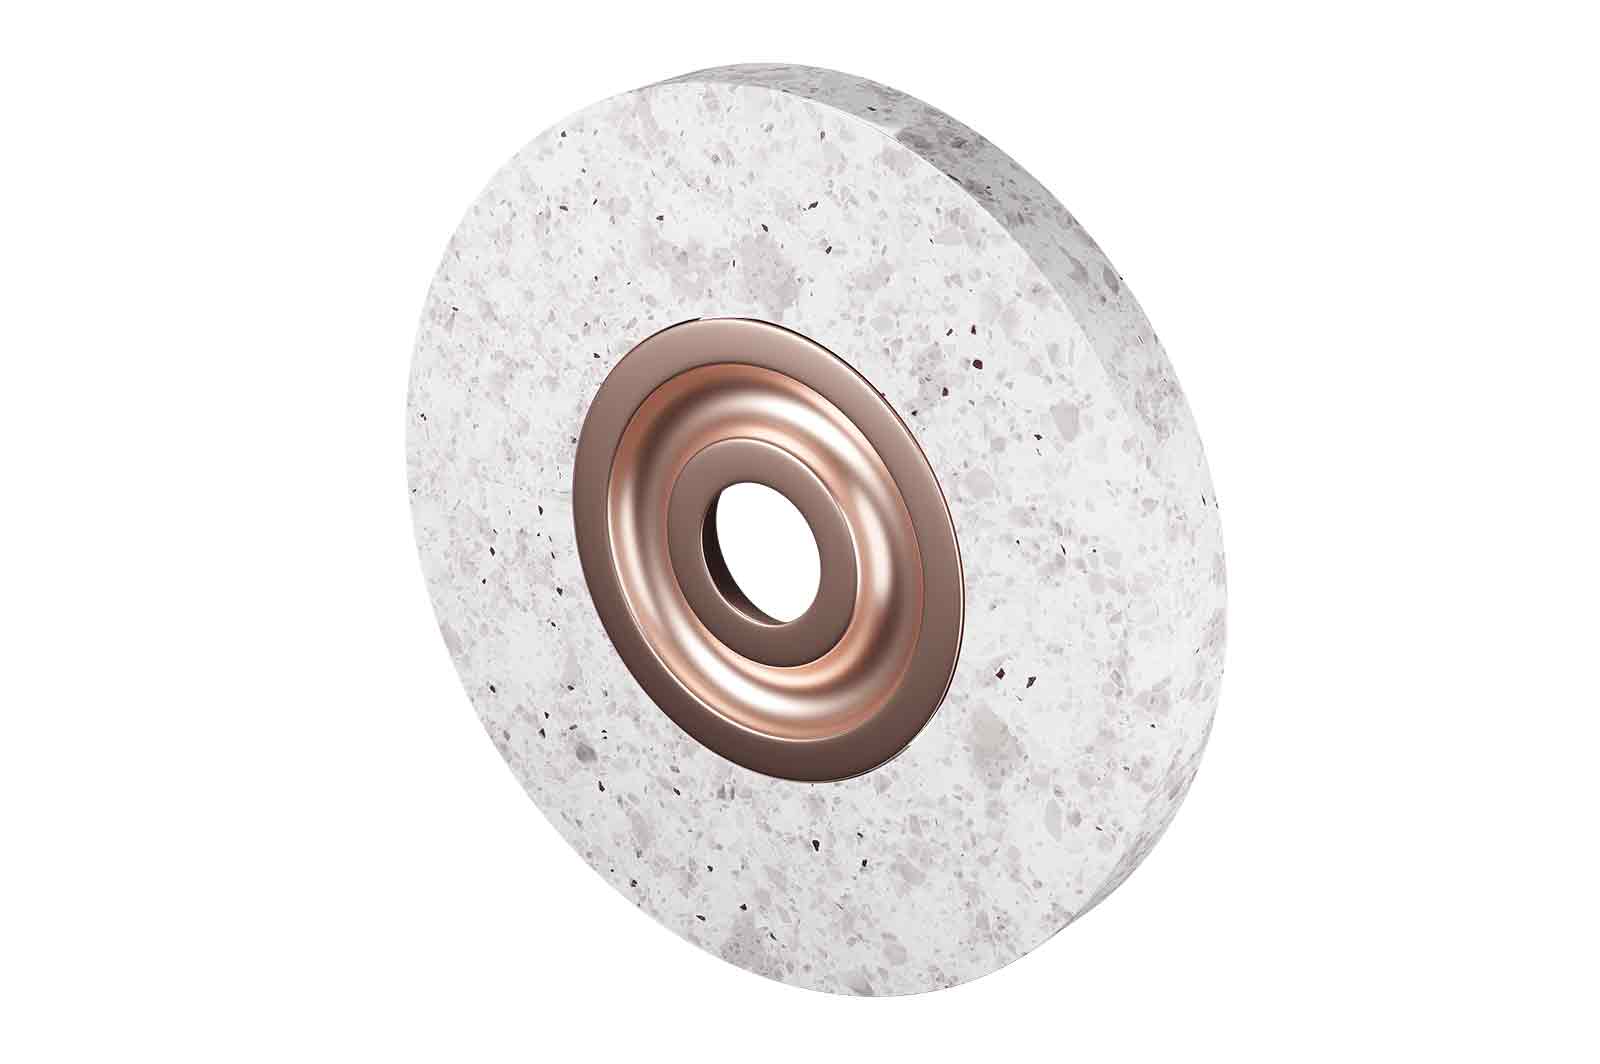 Abstract stone and metal round shaped detail 3d rendered illustration. Granite and bronze wheel. Component of single mechanism concept